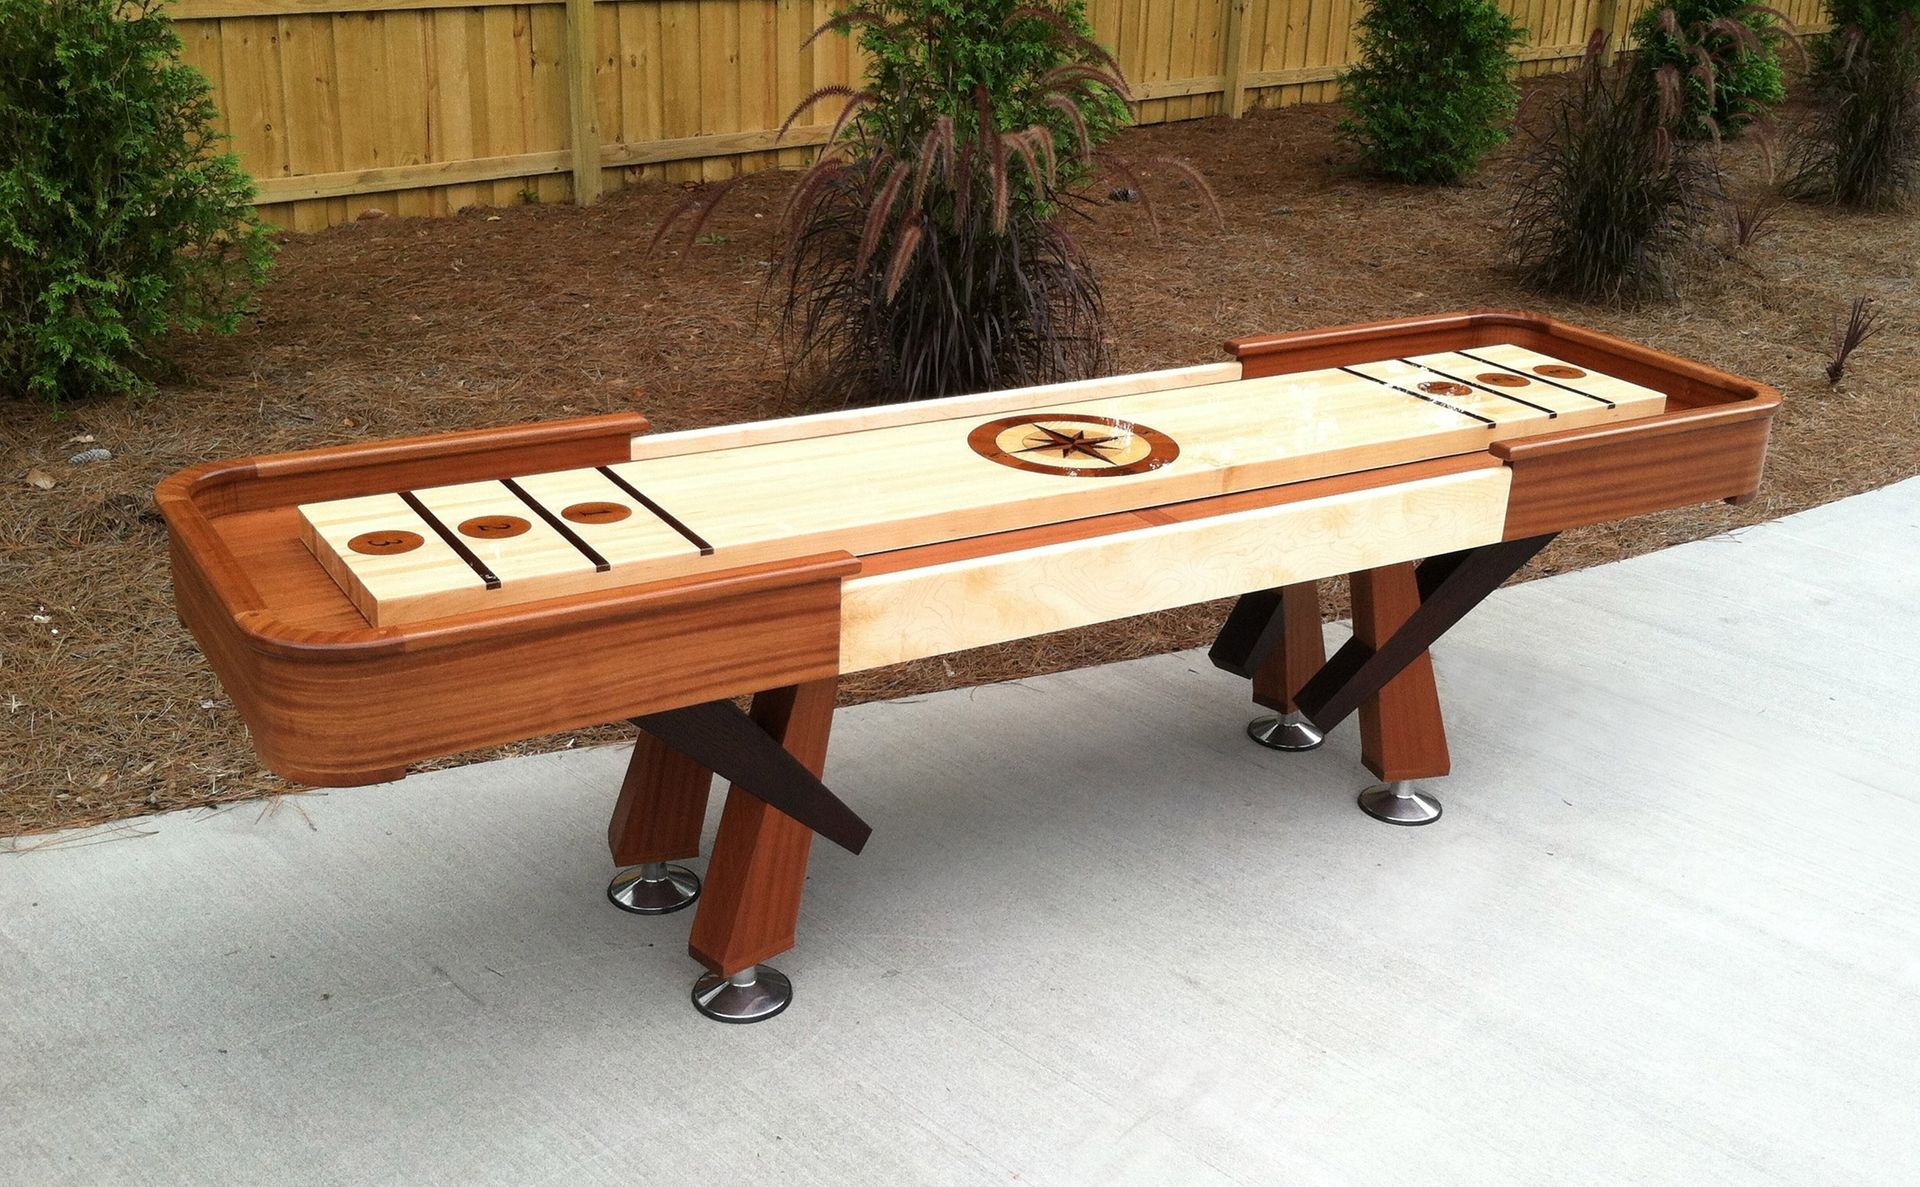 Hand Crafted Shuffleboard Table by Jason Hale Woodworking | CustomMade.com